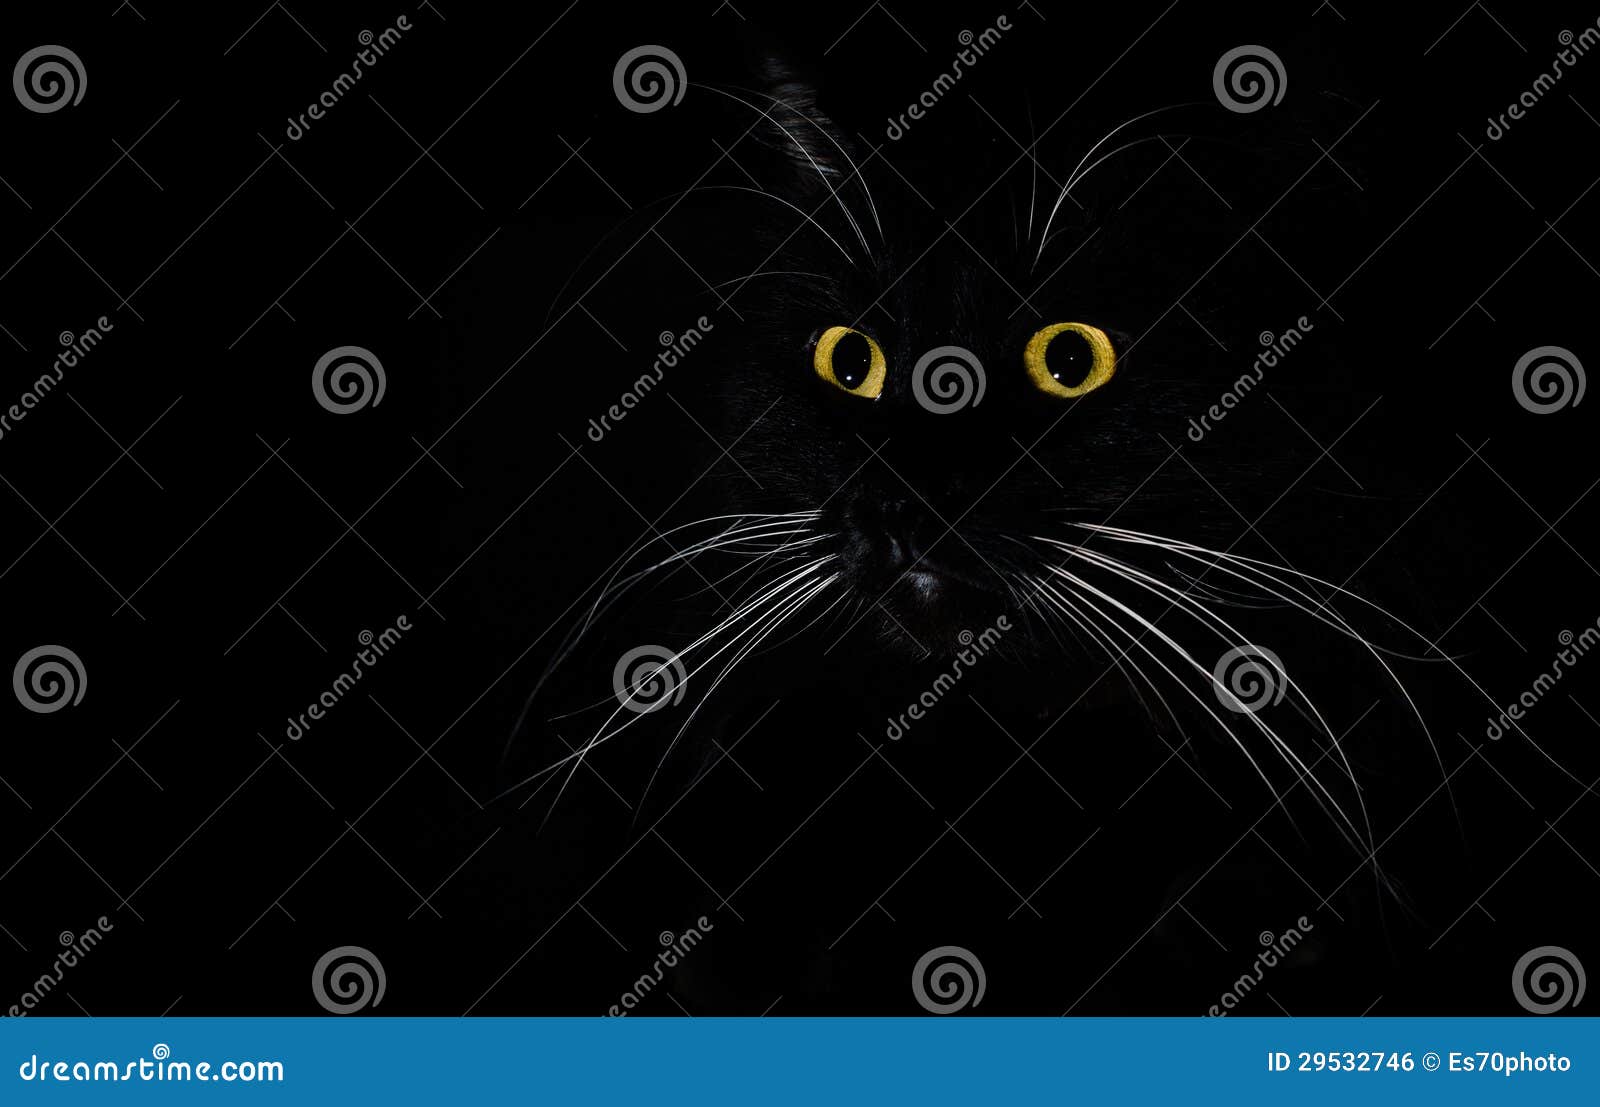 A Portrait of a Black Cat in a Dark Room Stock Photo - Image of colour